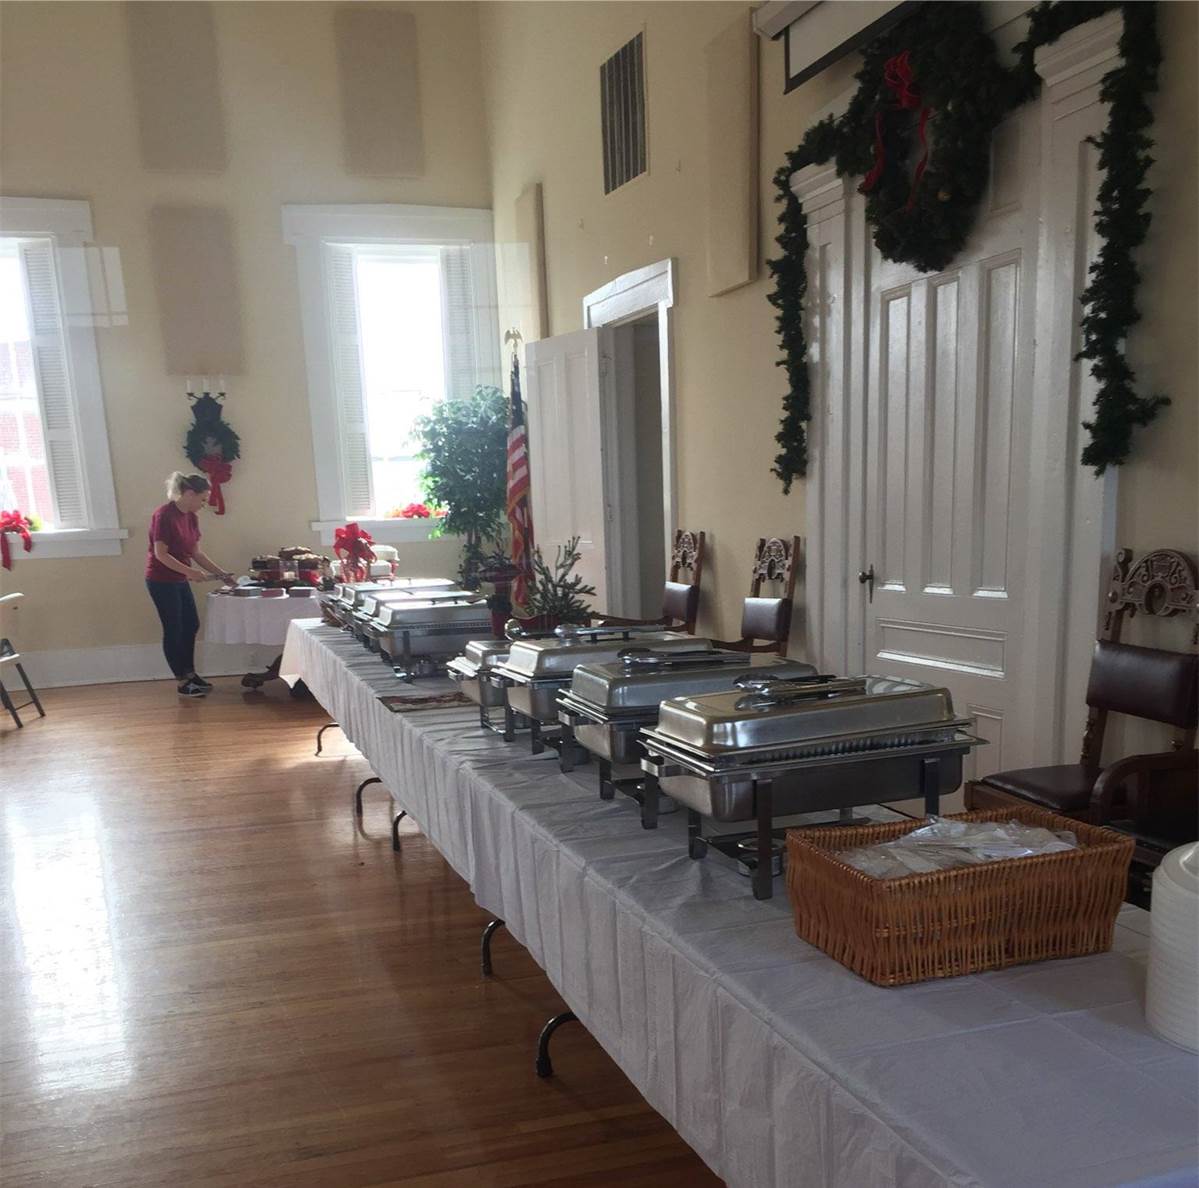 Bill and Fran's Christmas catering